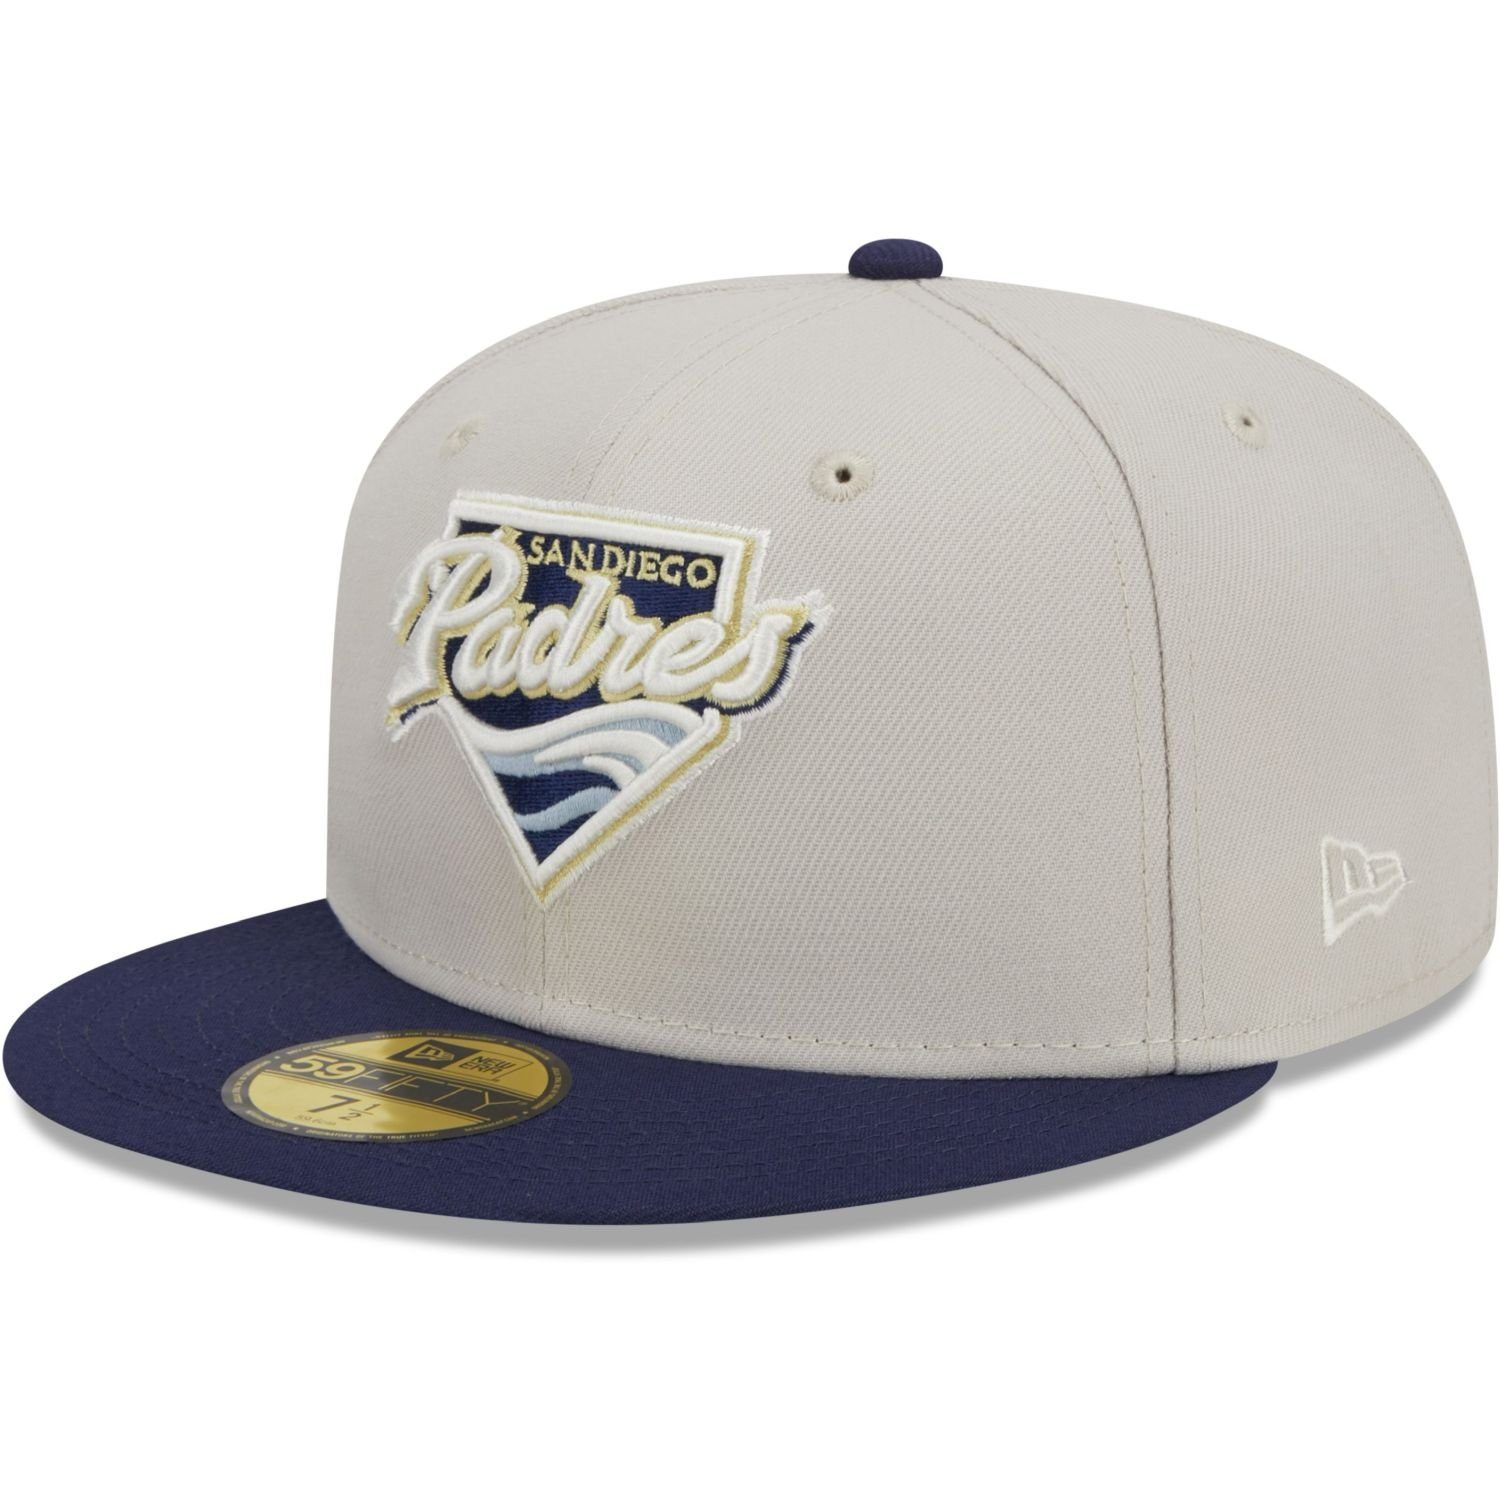 TEAM Cap New Era Padres FARM Fitted 59Fifty San Diego